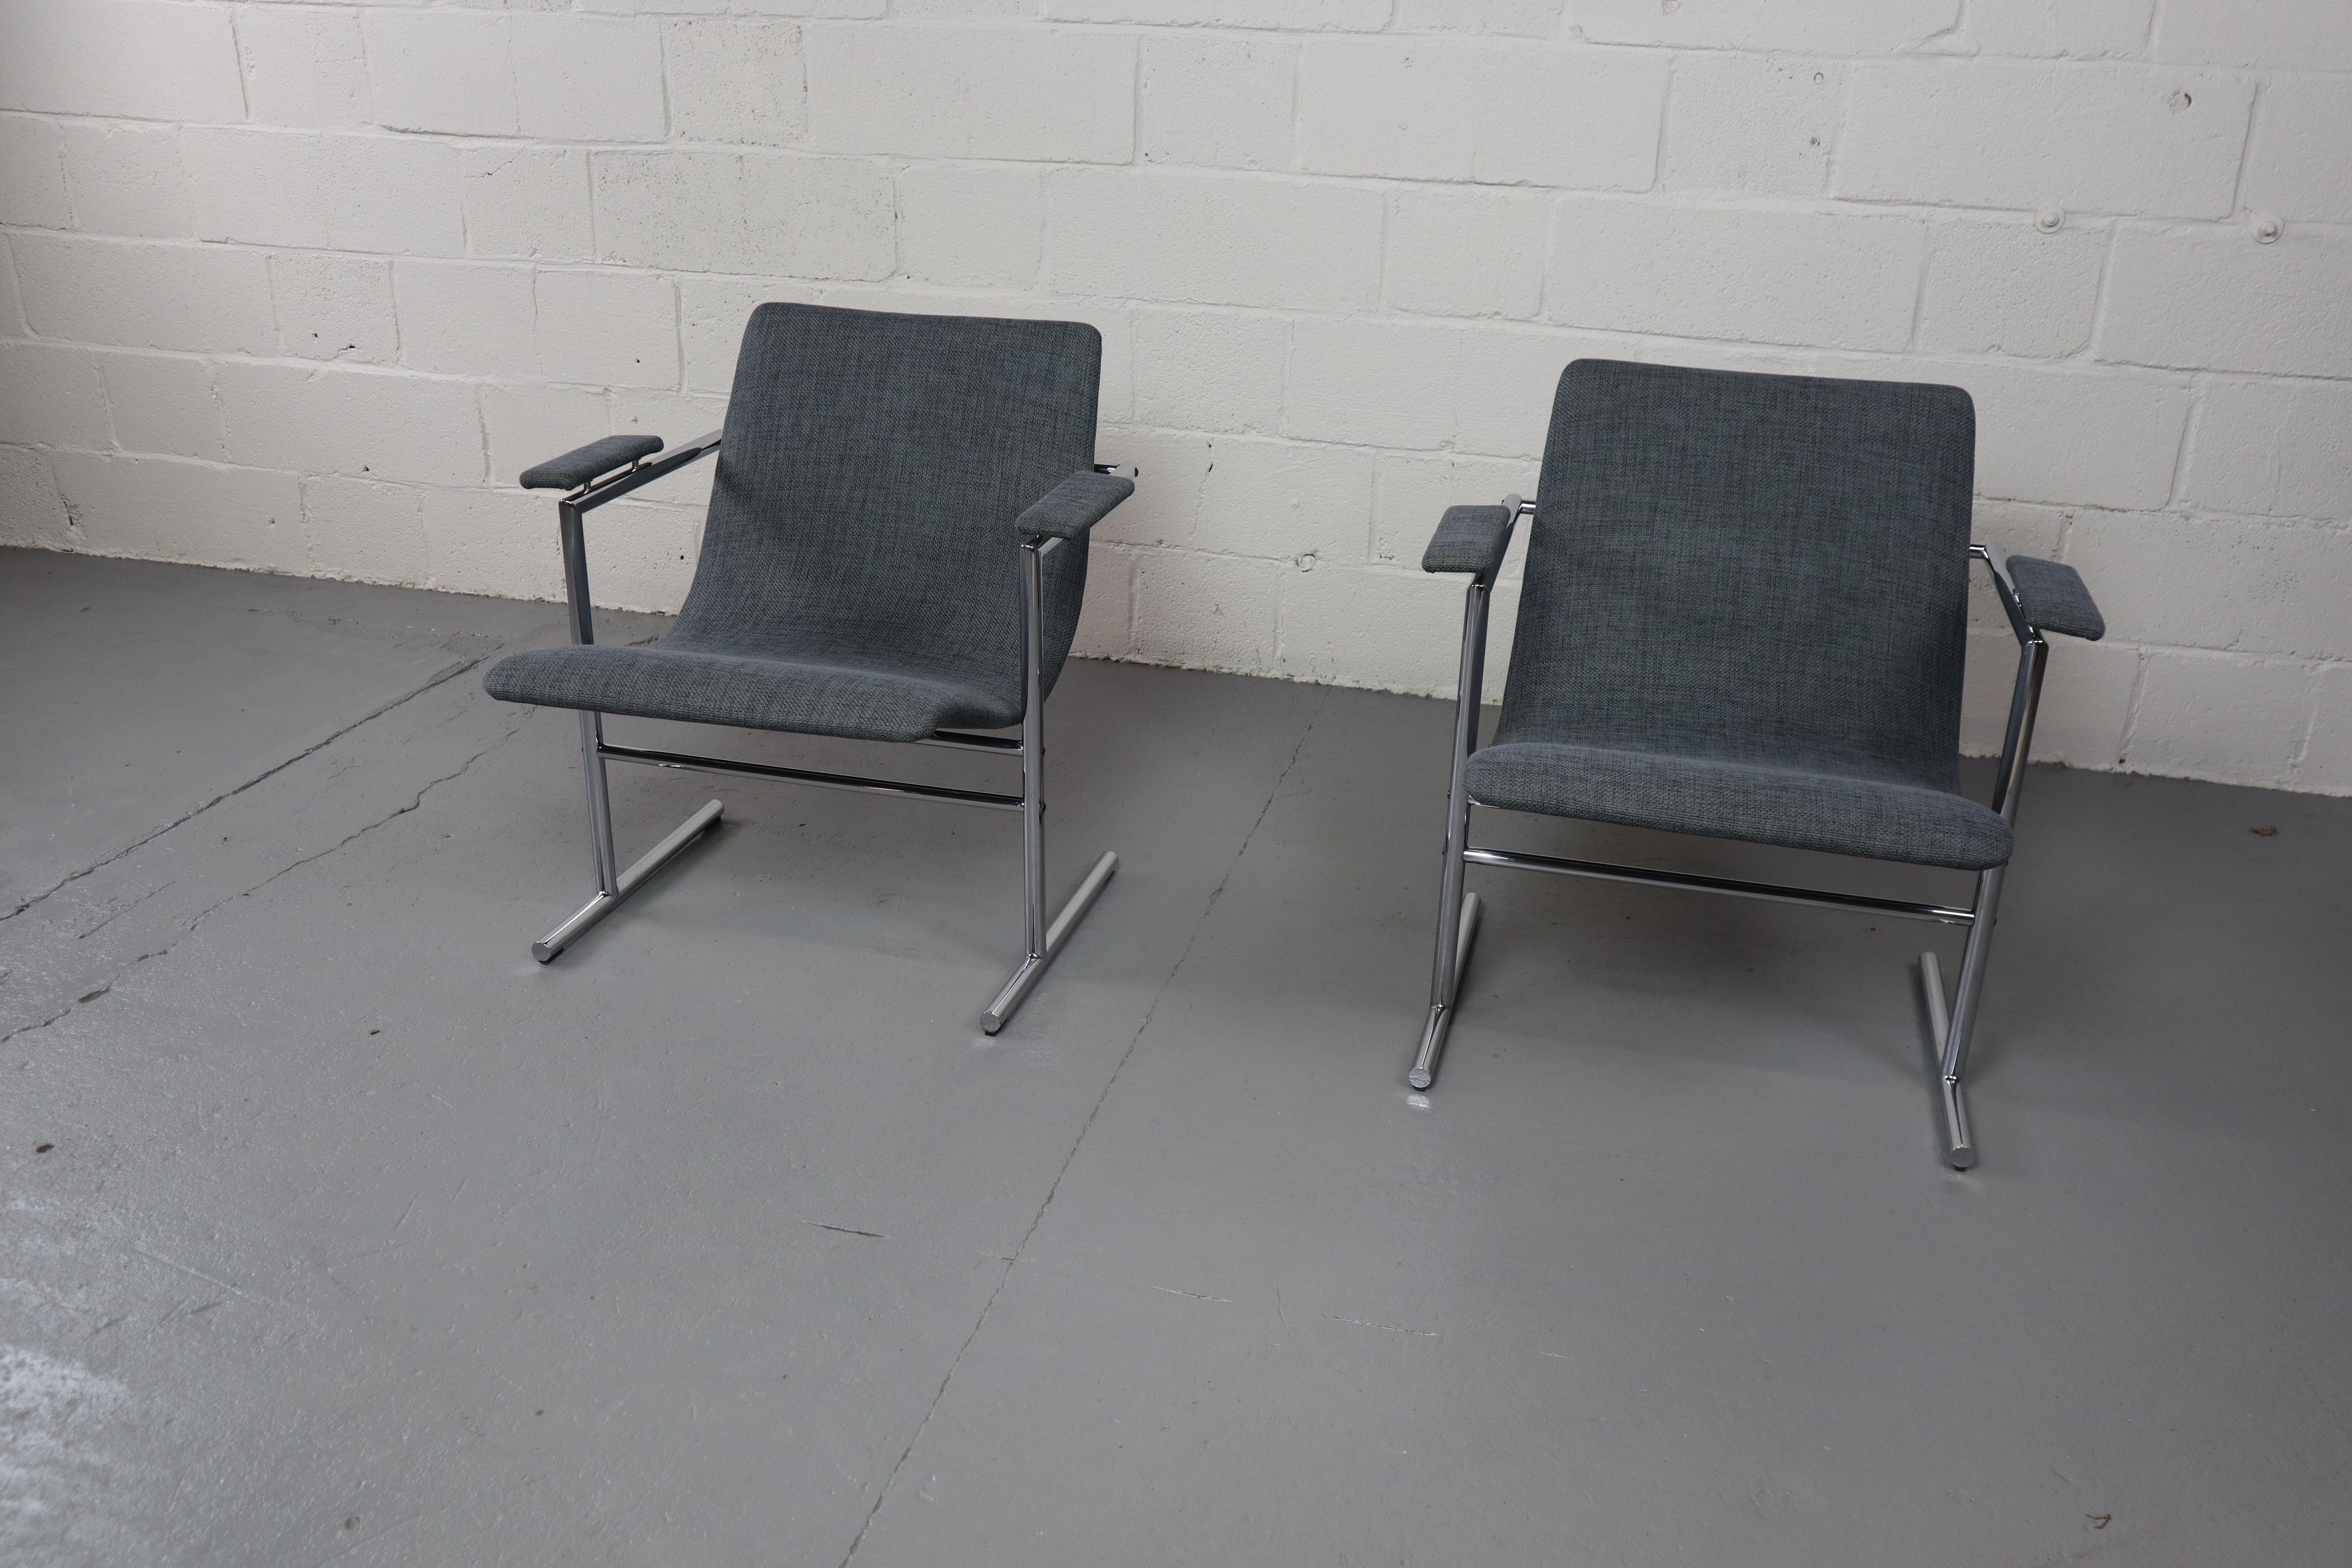 rim chairs for sale